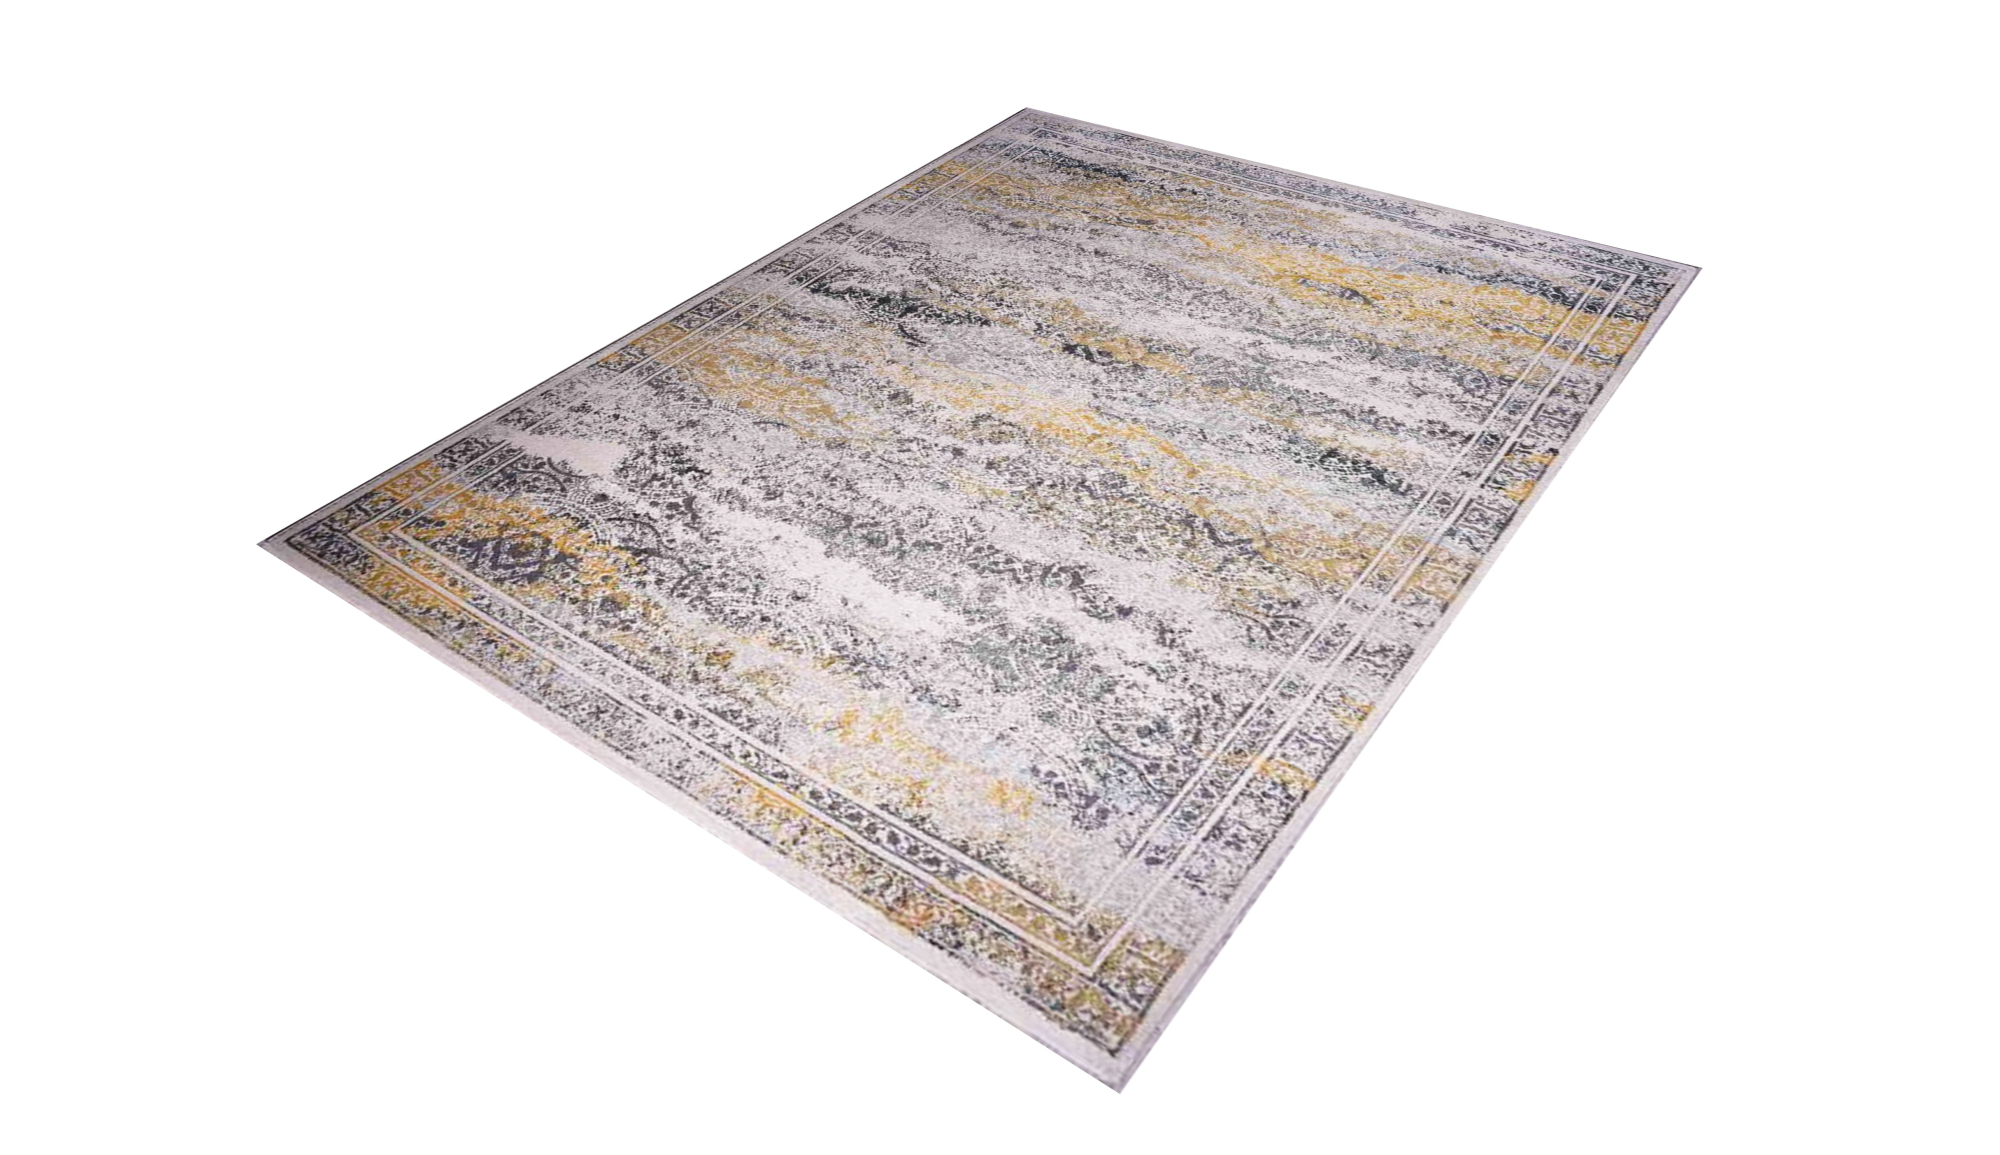 Saluzzo Canary Woven Rug-Area rug for living room, dining area, and bedroom